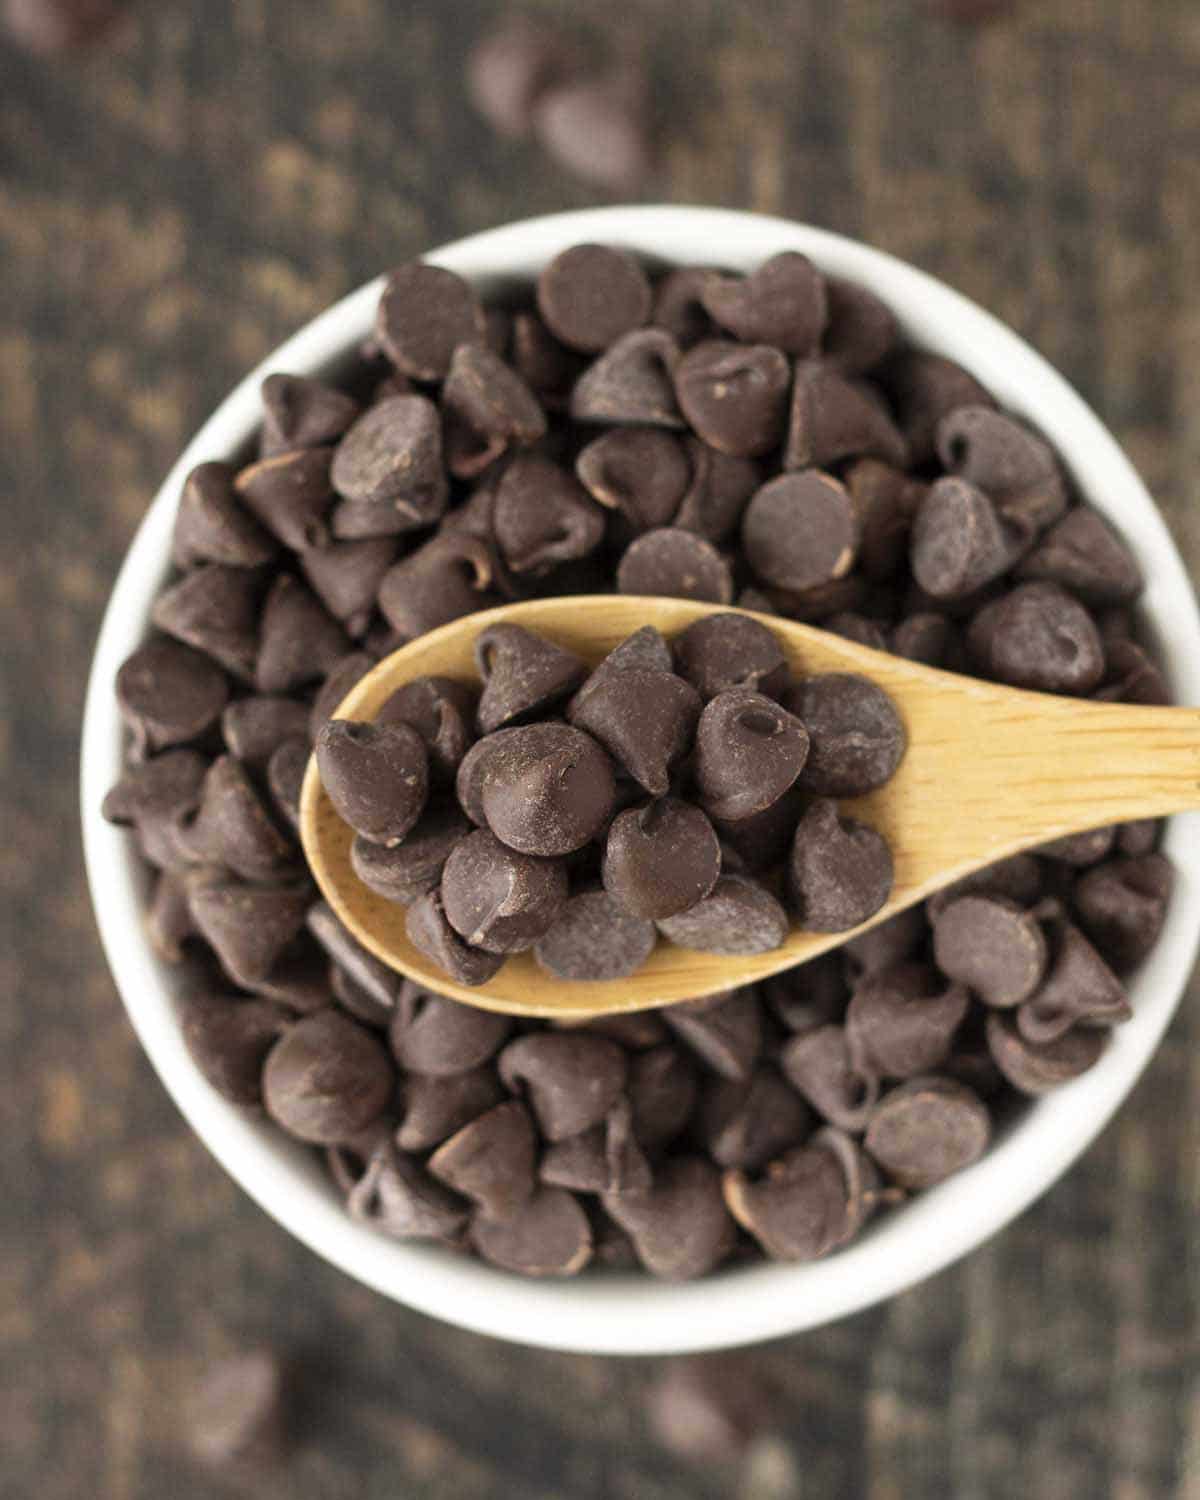 A spoon full of vegan chocolate chips being held over a bowl.